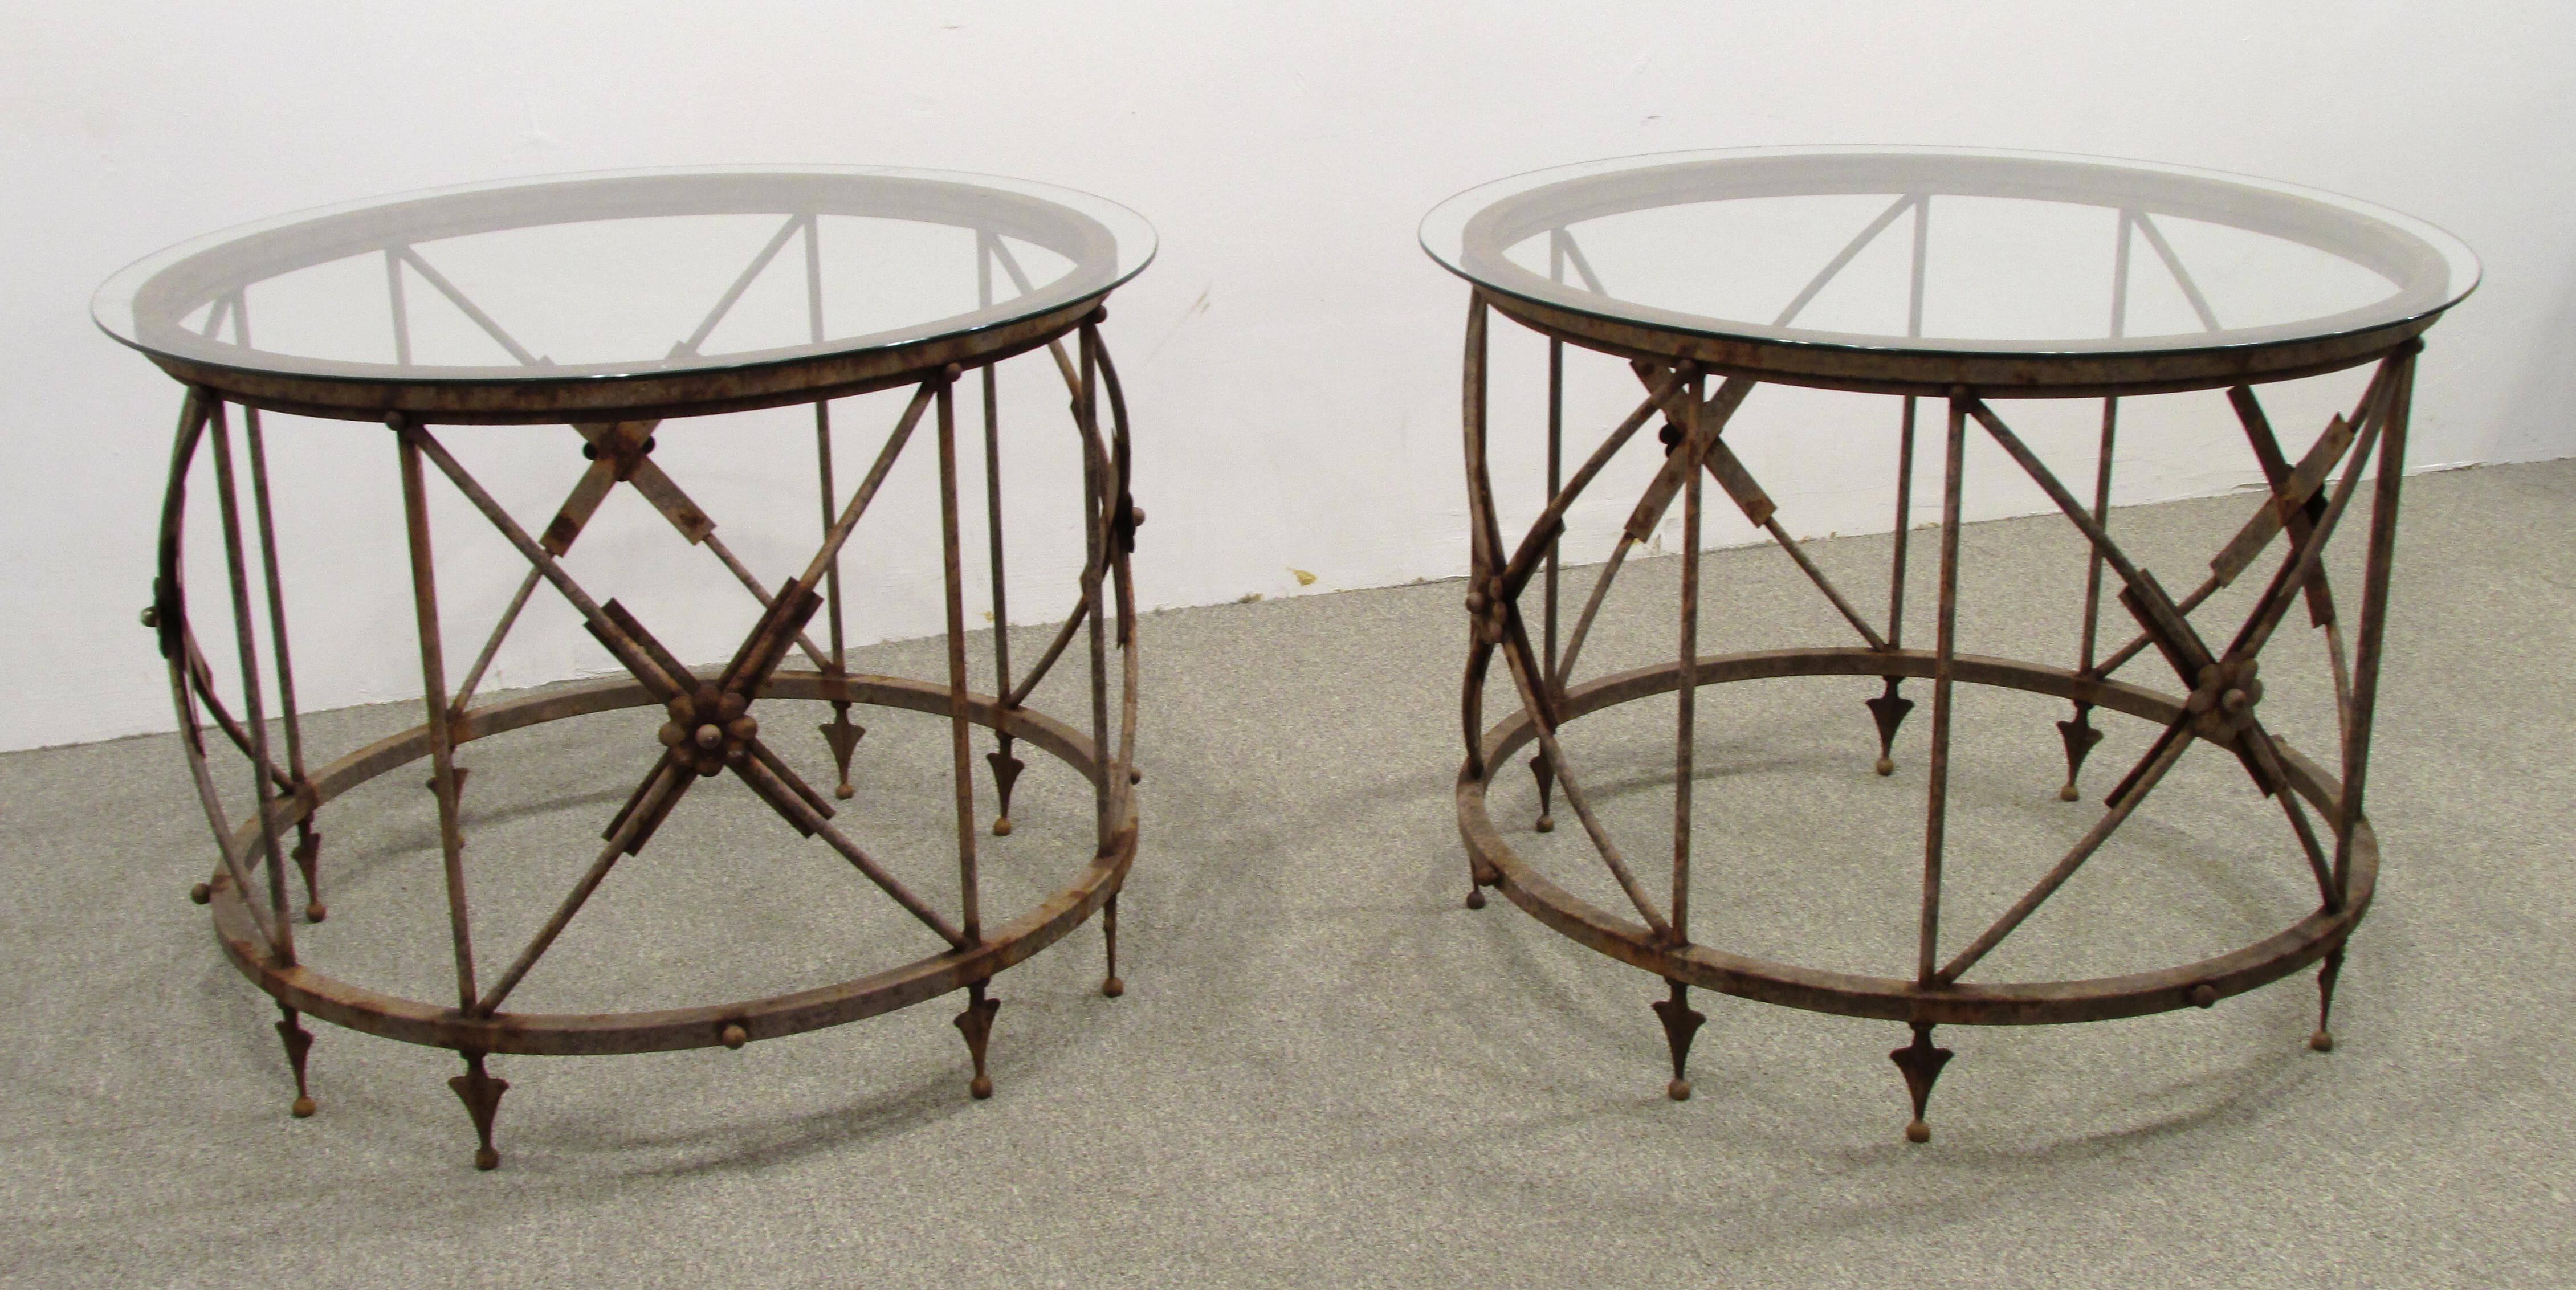 Painted Pair of Round Neoclassical Garden Tables For Sale